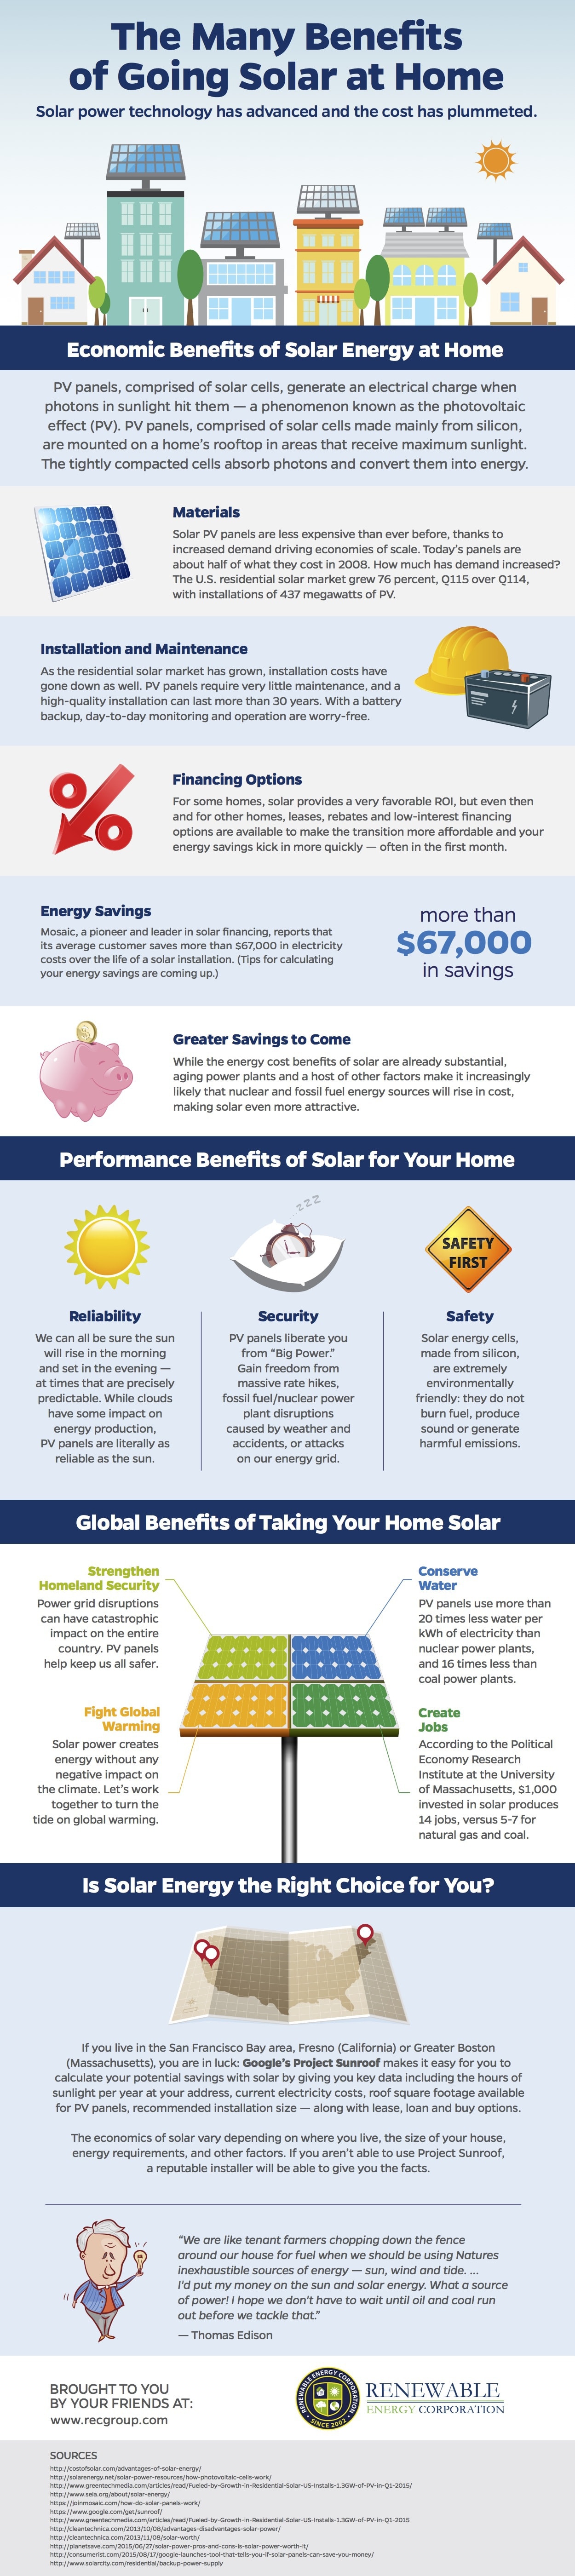 The Many Benefits of Going Solar at Home Infographic